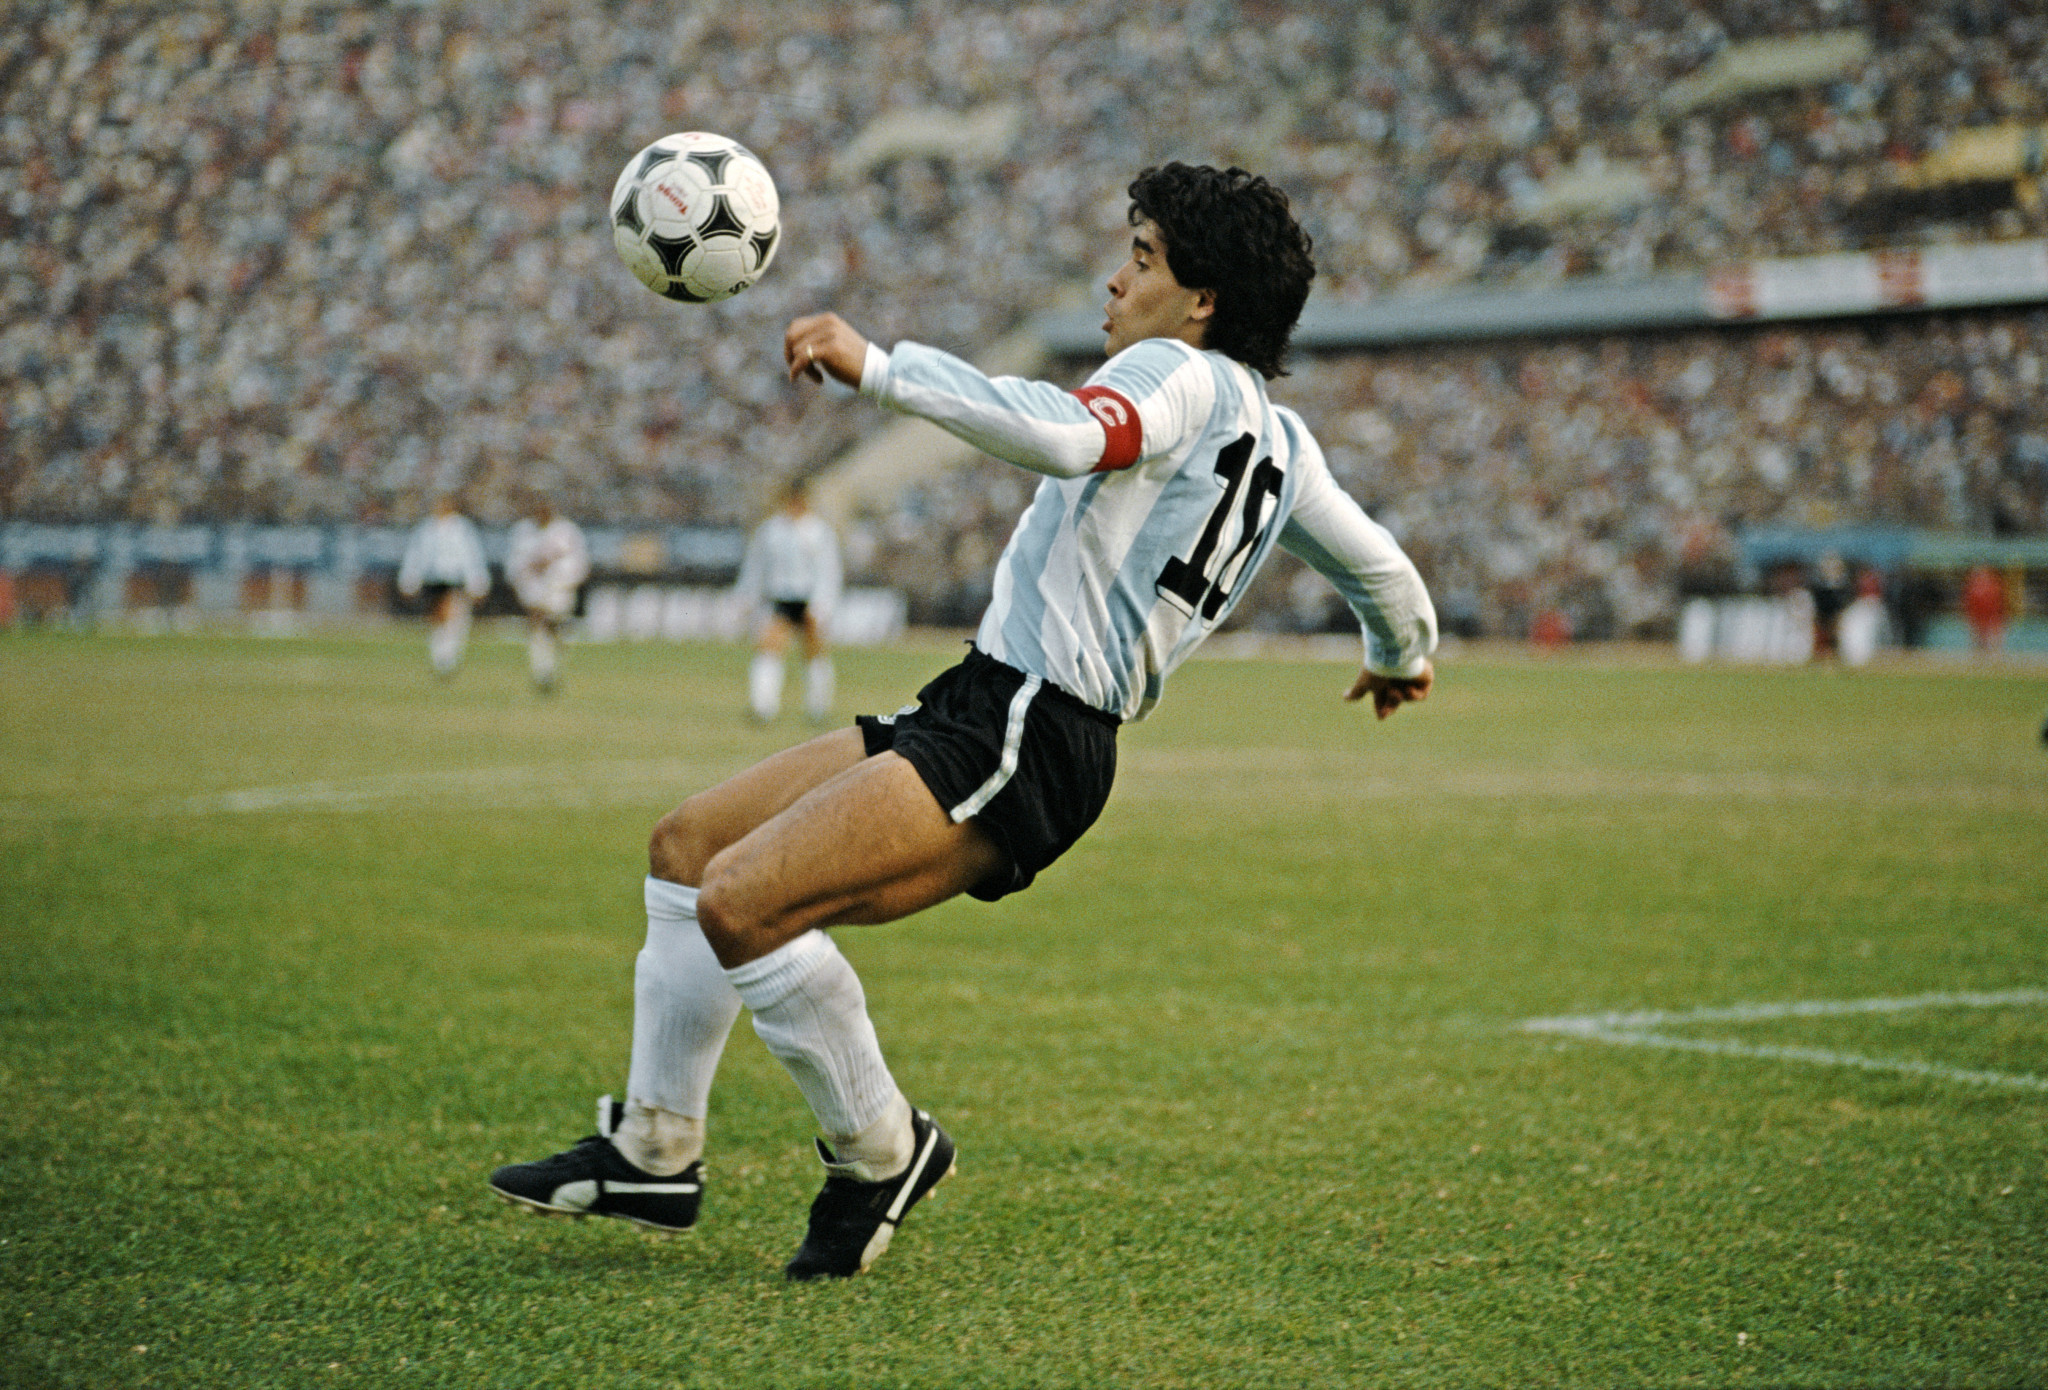 Diego Maradona, widely considered one of football's greatest players, helped Argentina win the FIFA World Cup in 1986 ©Getty Images